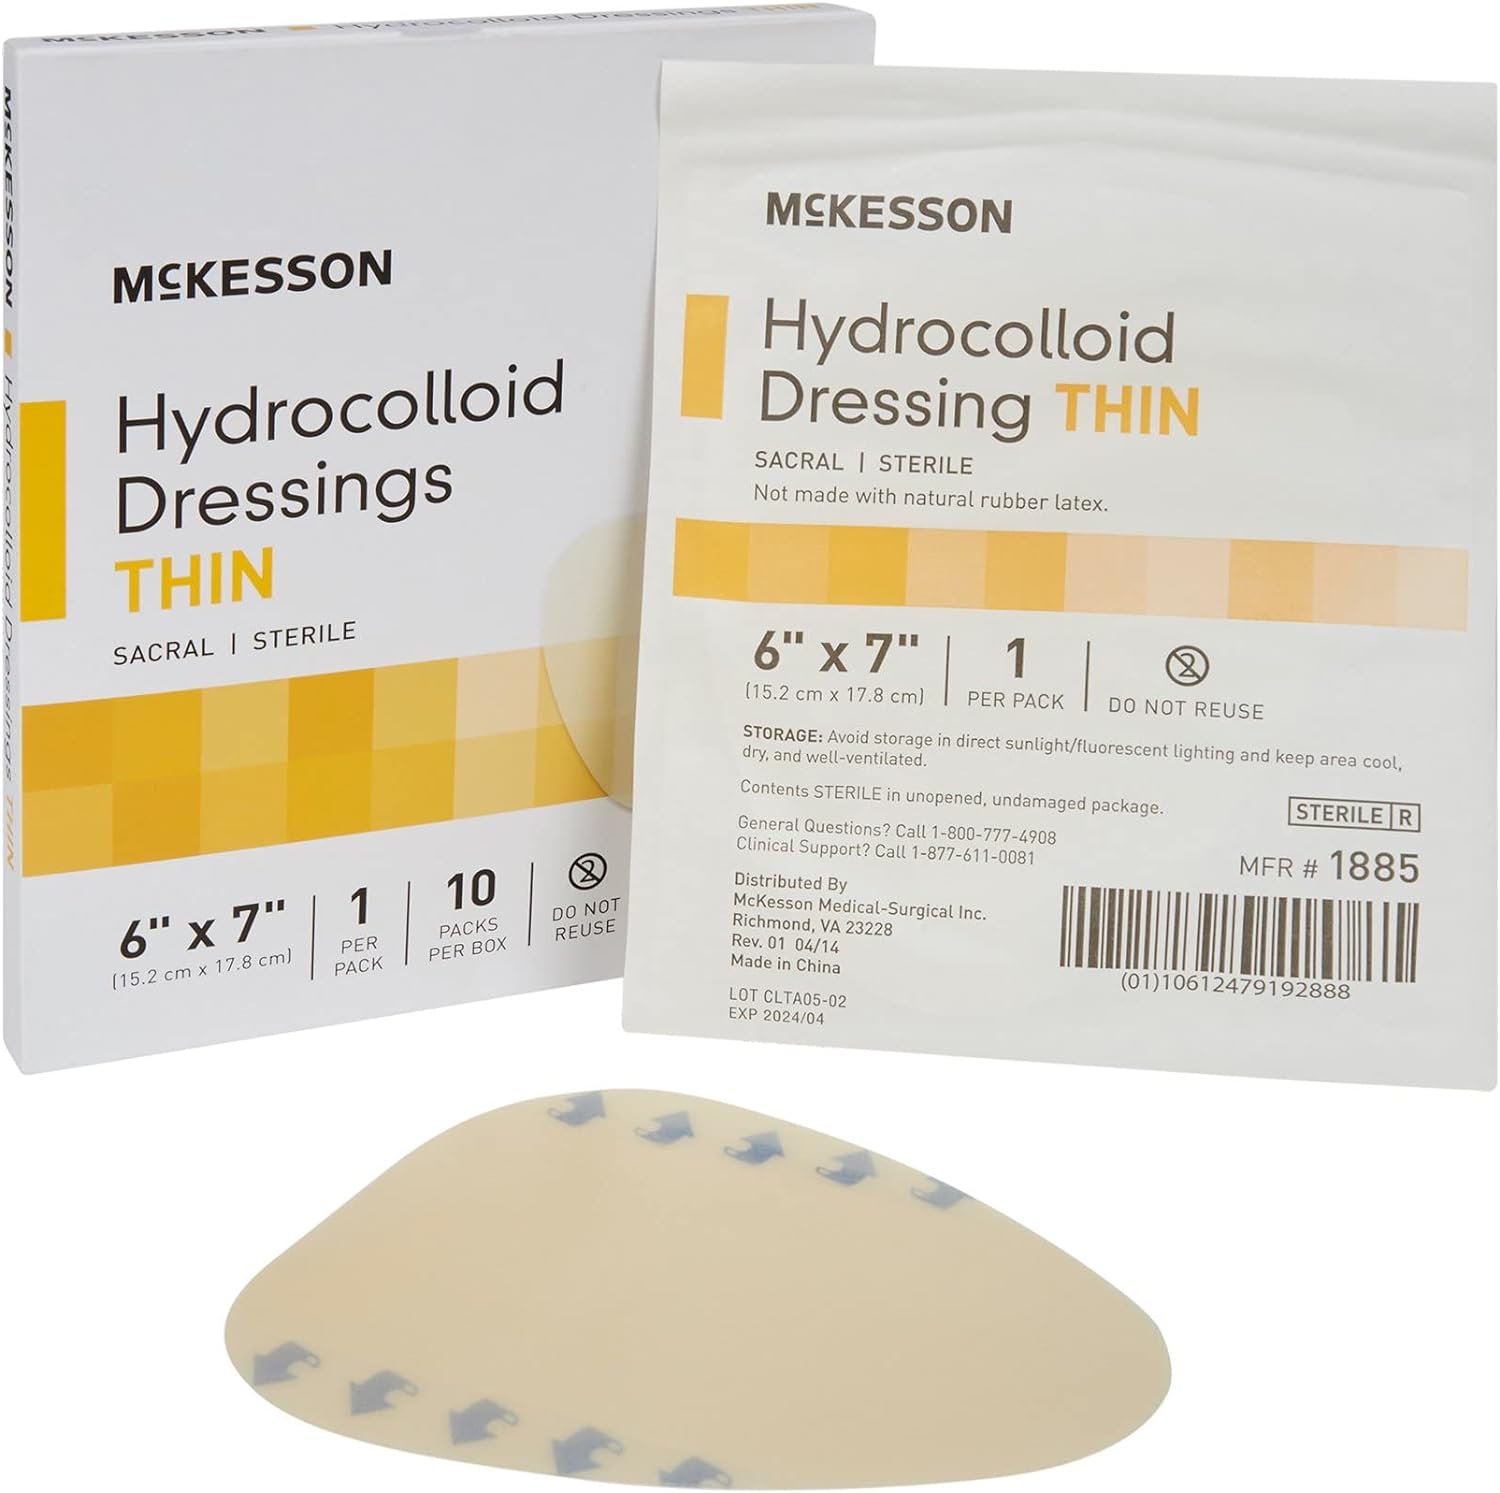 McKesson Hydrocolloid Dressing, Sterile, Sacral, Thin, 6 in x 7 in, 10 Count, 1 Pack